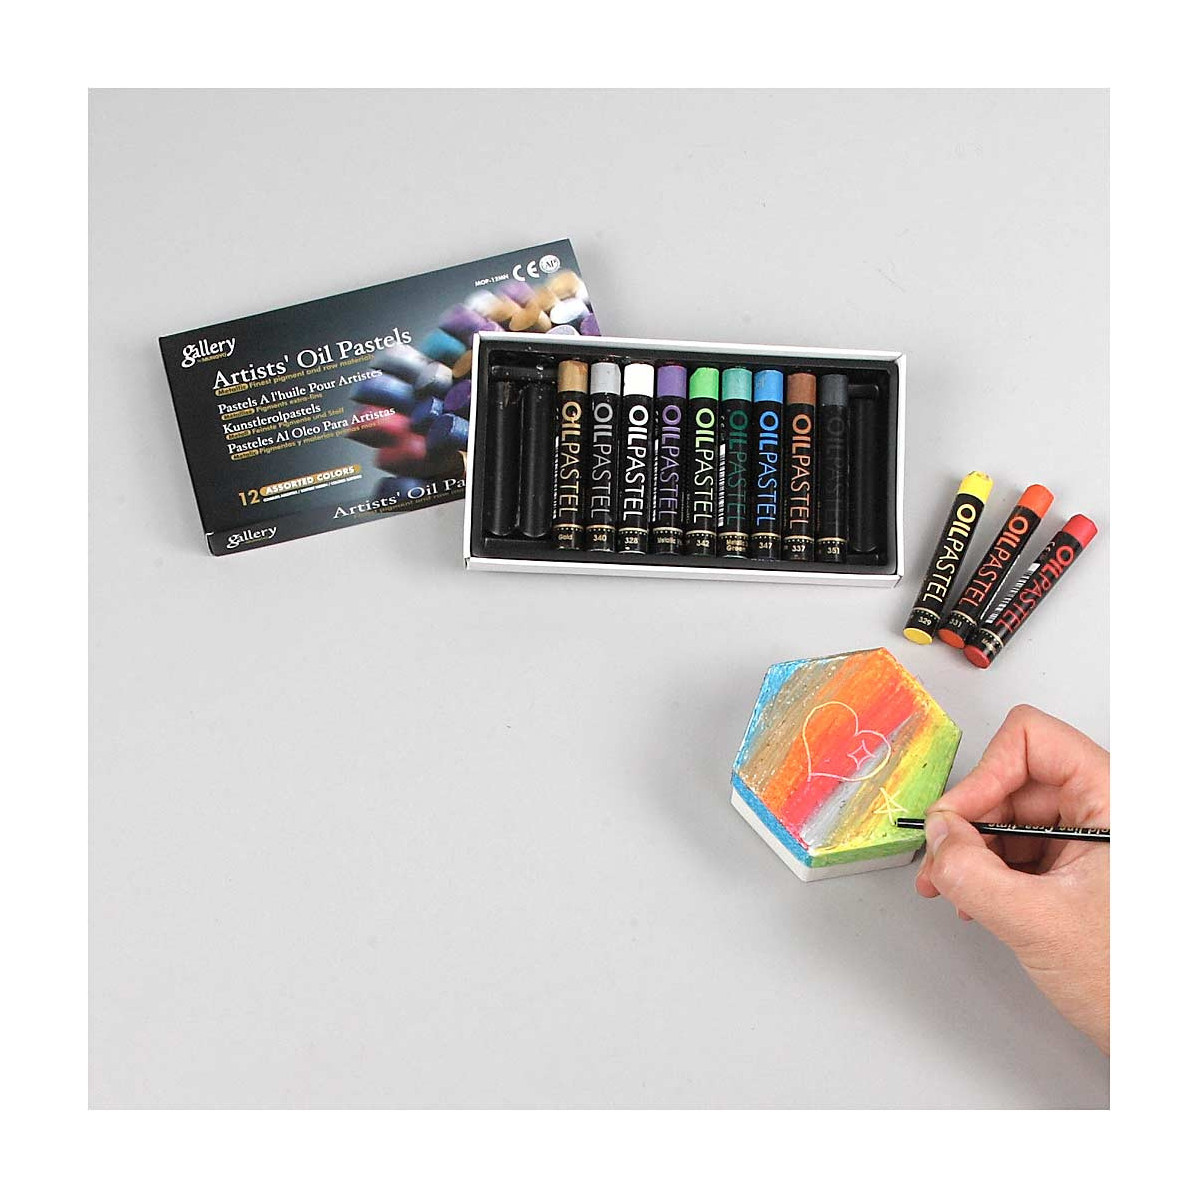 Gallery Oil Pastel, L: 7 cm, thickness 11 mm, neon colours, 12 pc/ 1 pack